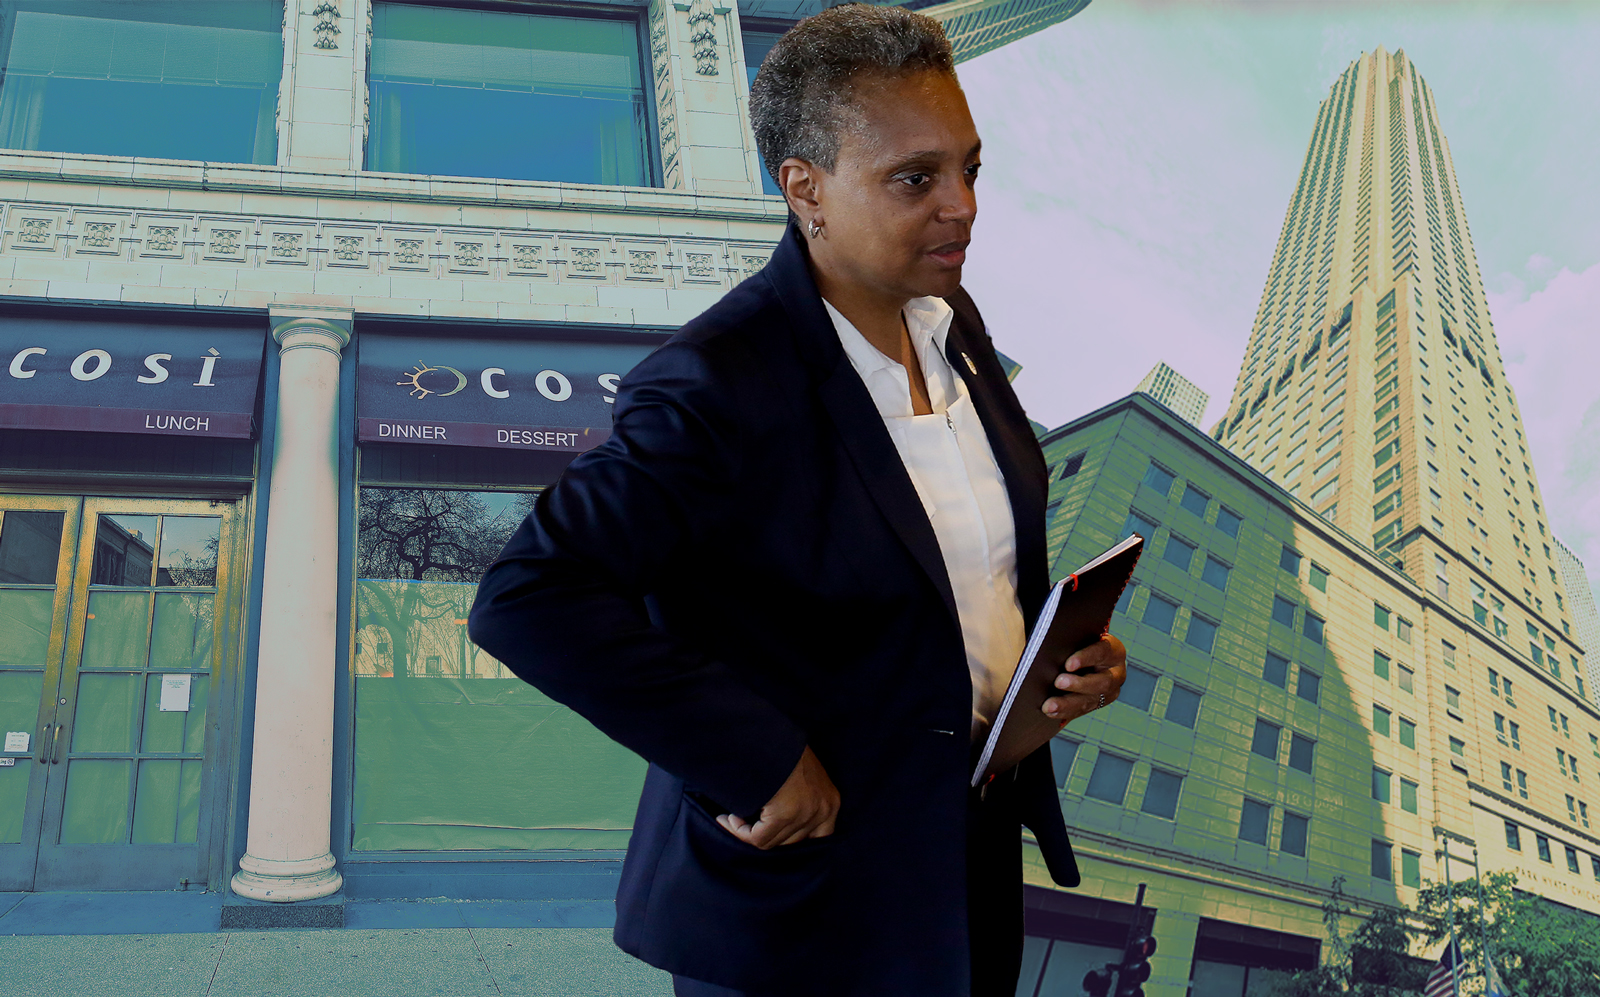 Mayor Lori Lightfoot said the city may have to raise property taxes to make up for some of the economic losses it sustained from the coronavirus closures